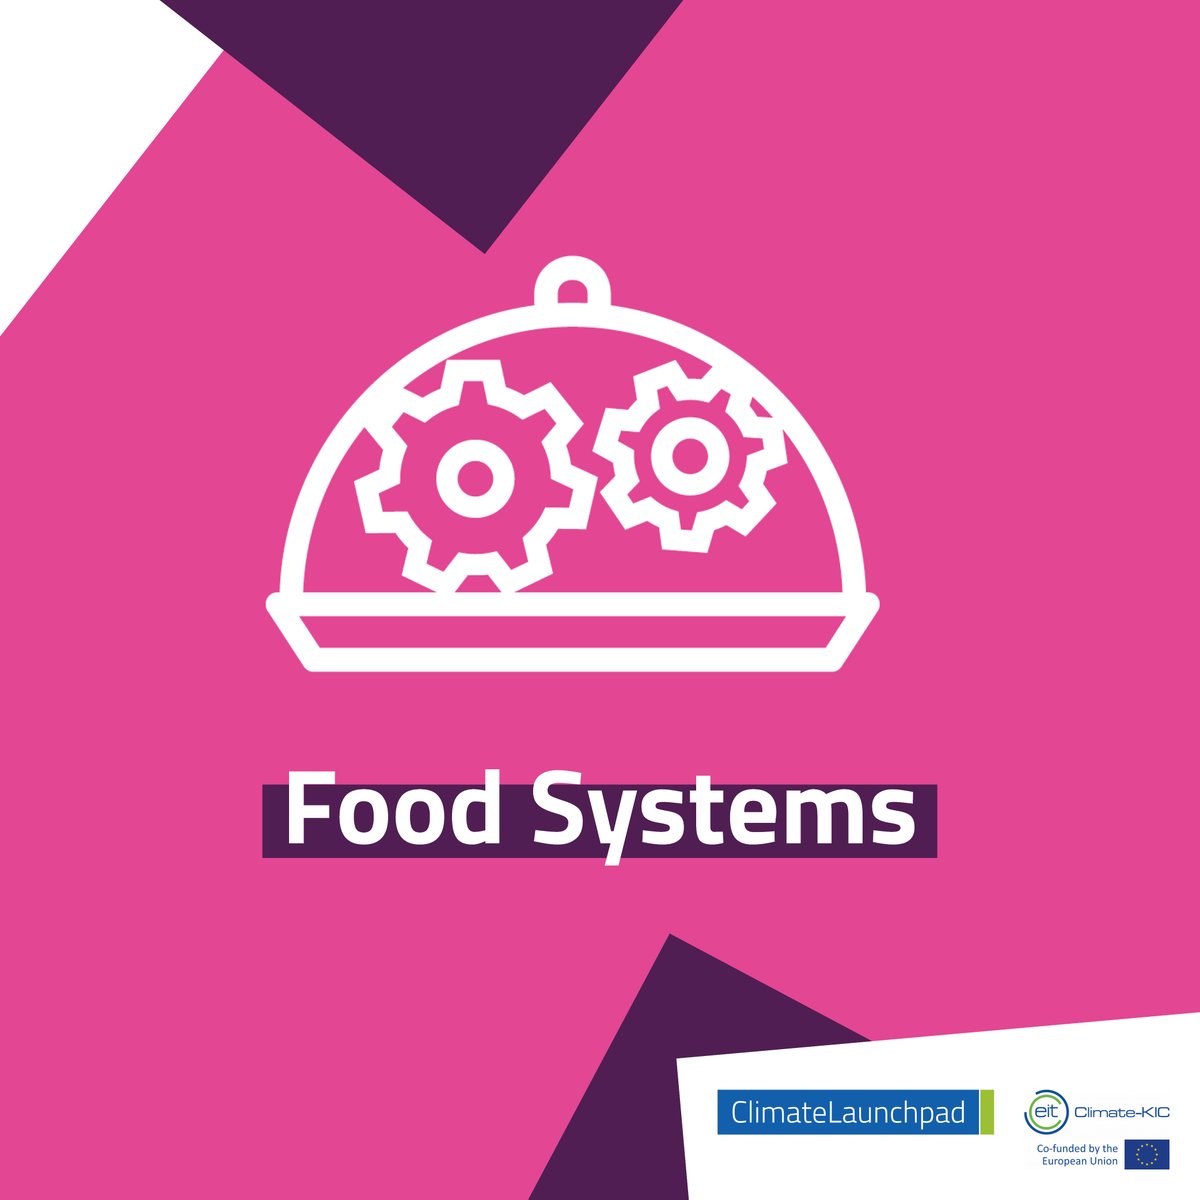 🥑🍕🍜🍉We are looking for #start-ups pioneering the global transition to climate-smart #food production. Do you have a #business idea that fits this theme? Don't snooze and lose. Apply now: ow.ly/bOvS50ICUOk #foodsystems #cleanfood #entrepreneurship #competition #CLP22